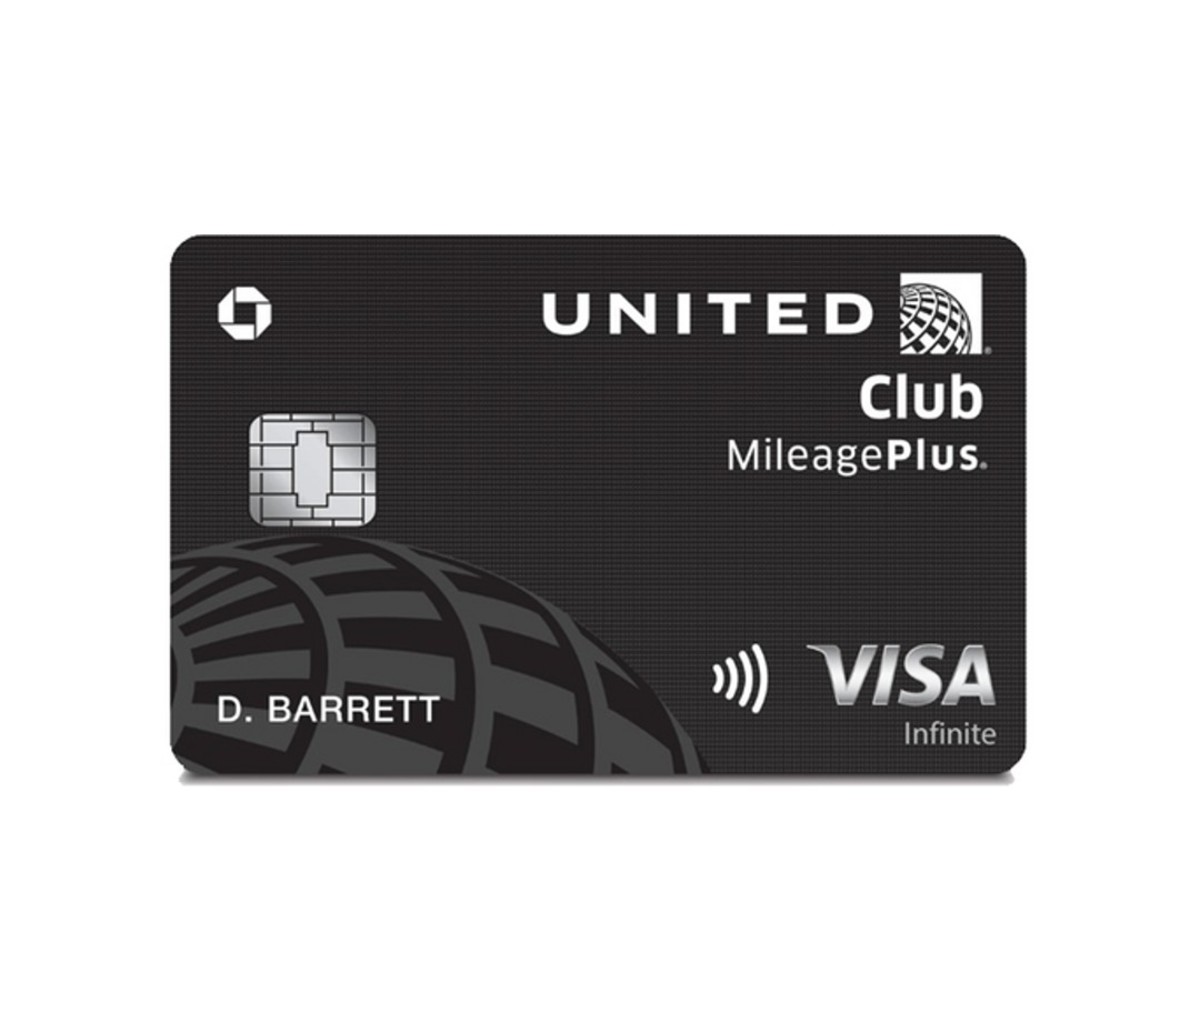 chase united club card travel insurance